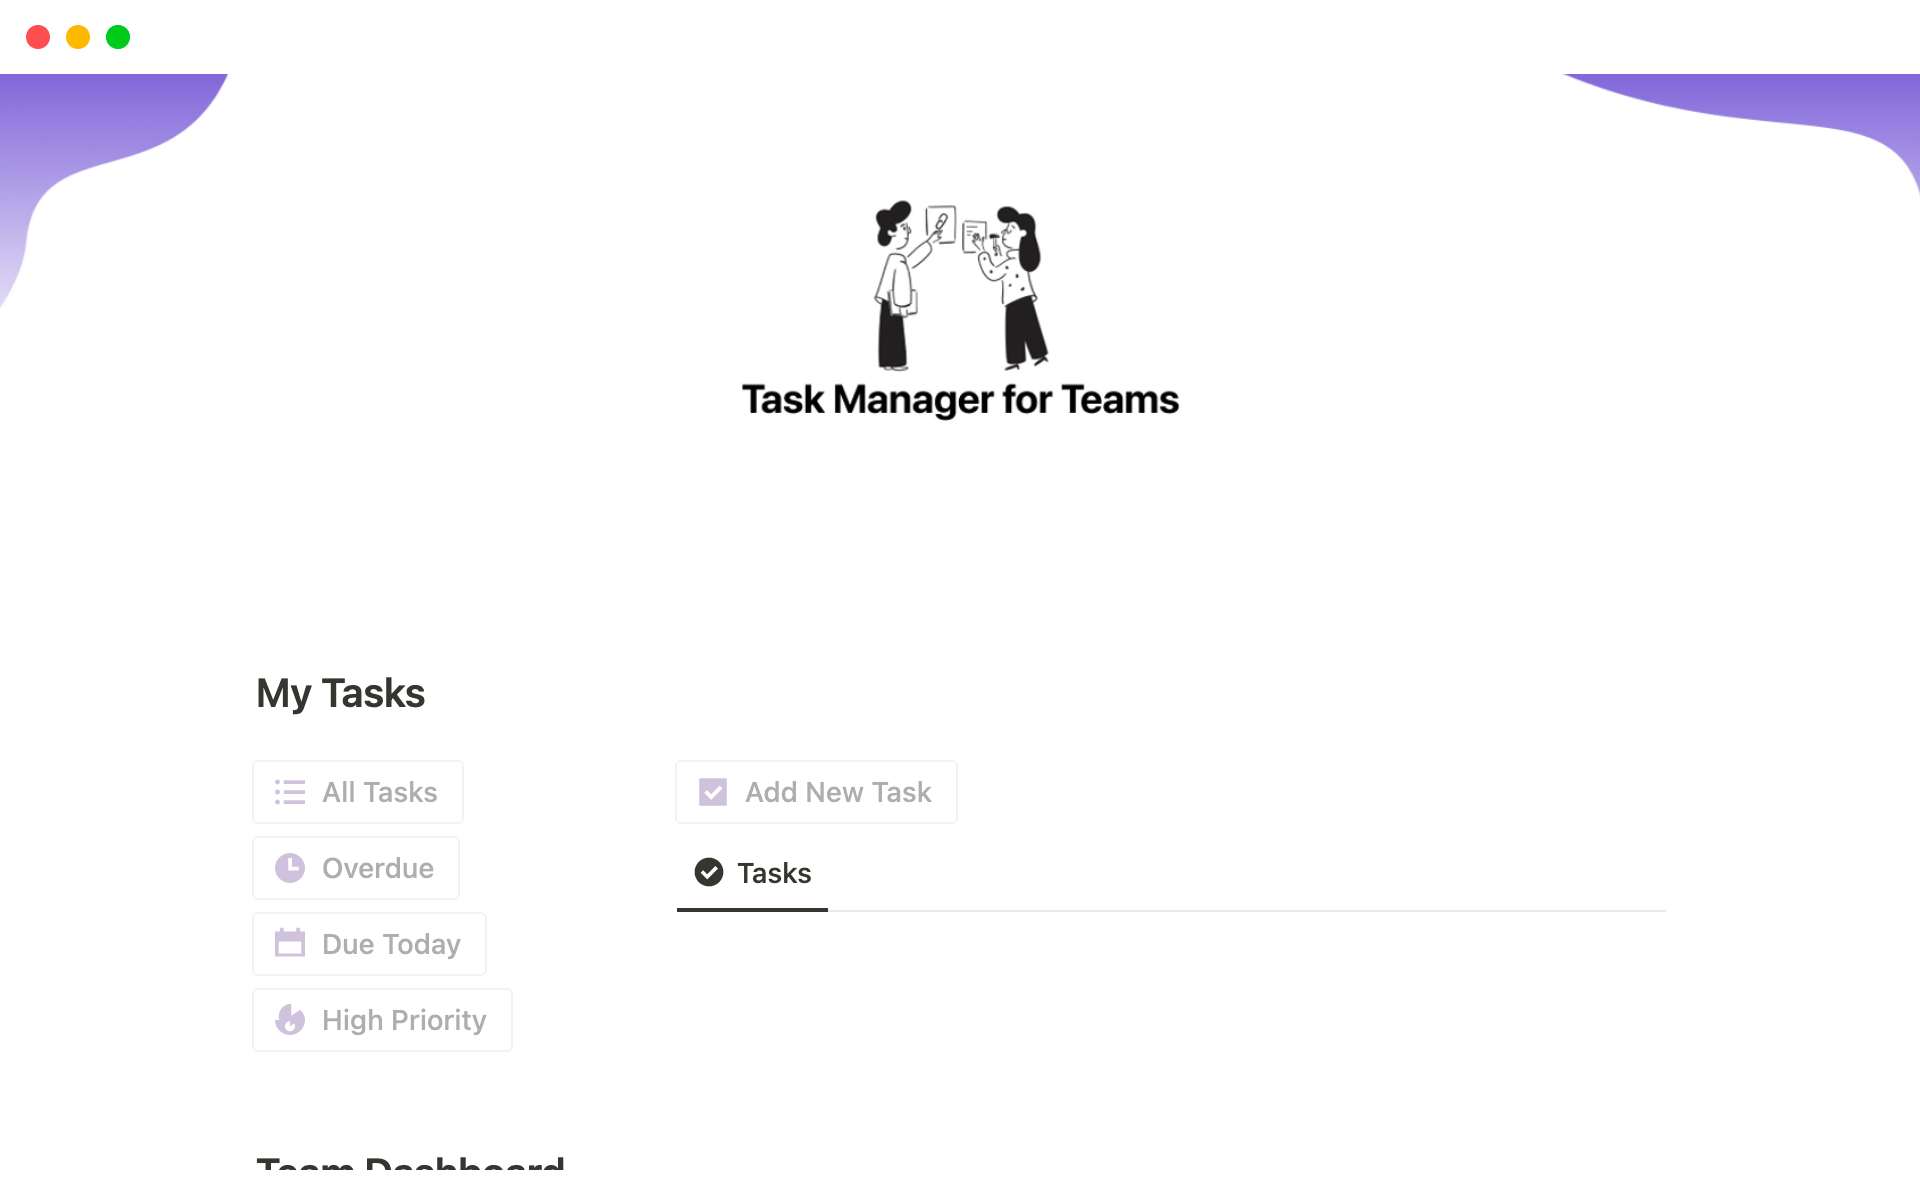 Our Notion template is a comprehensive task manager specifically designed for teams, providing a centralized and customizable platform for task delegation, progress tracking, and team collaboration.